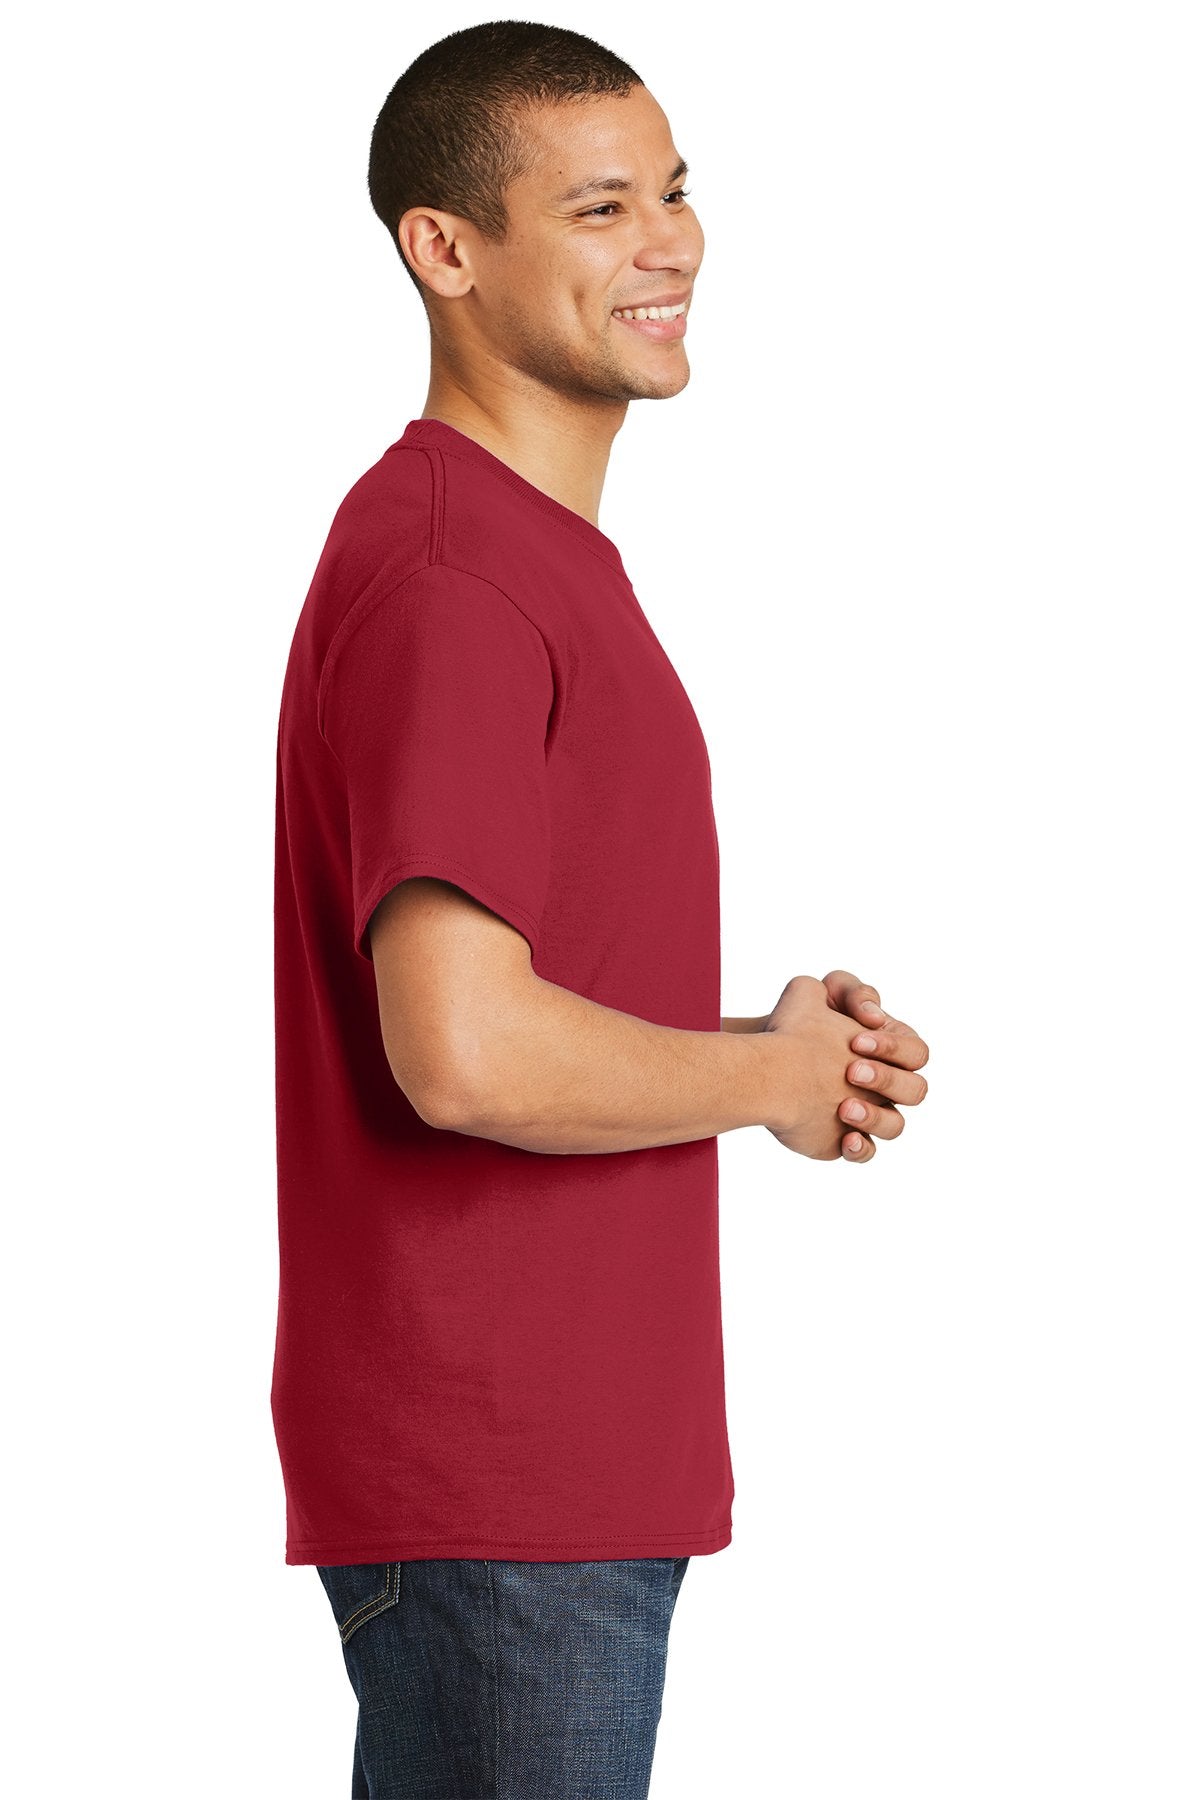 hanes beefy cotton t shirt 5180 deep red